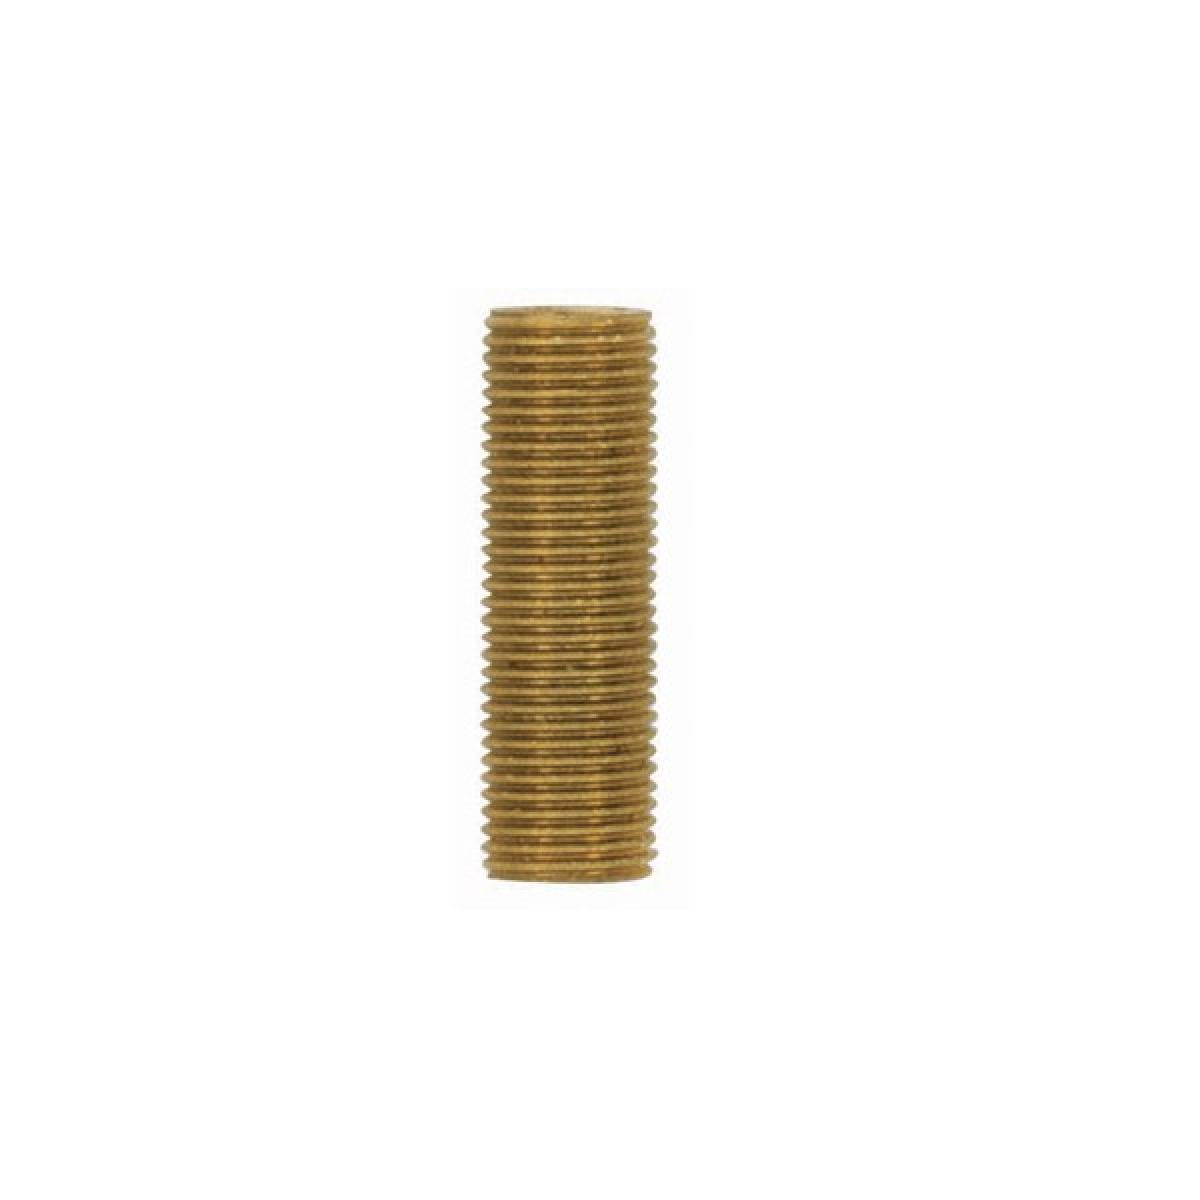 Satco 90-1183 1/8 IP Solid Brass Unfinished 5/8" Length 3/8" Wide